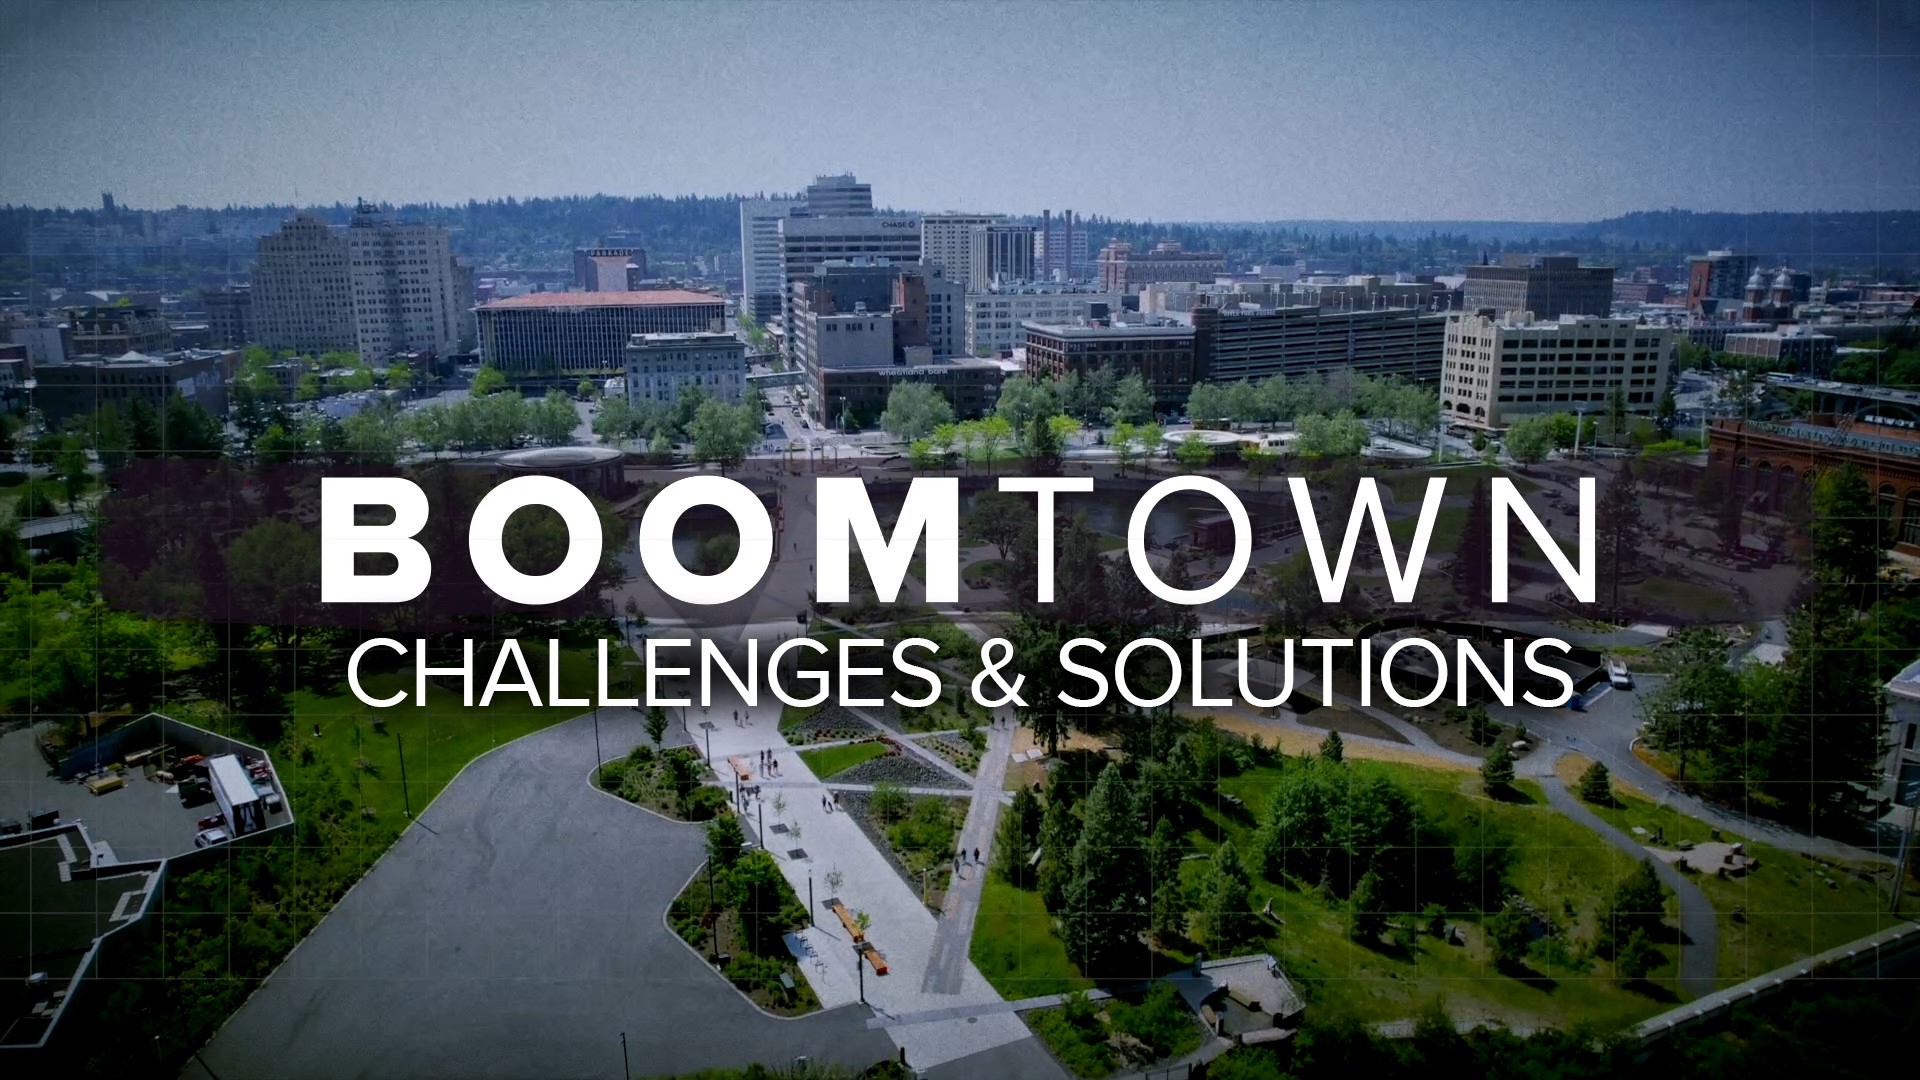 A growing population has brought new challenges with housing, homelessness, and rising costs. In this KREM 2 Boomtown special we examine the issues and solutions.